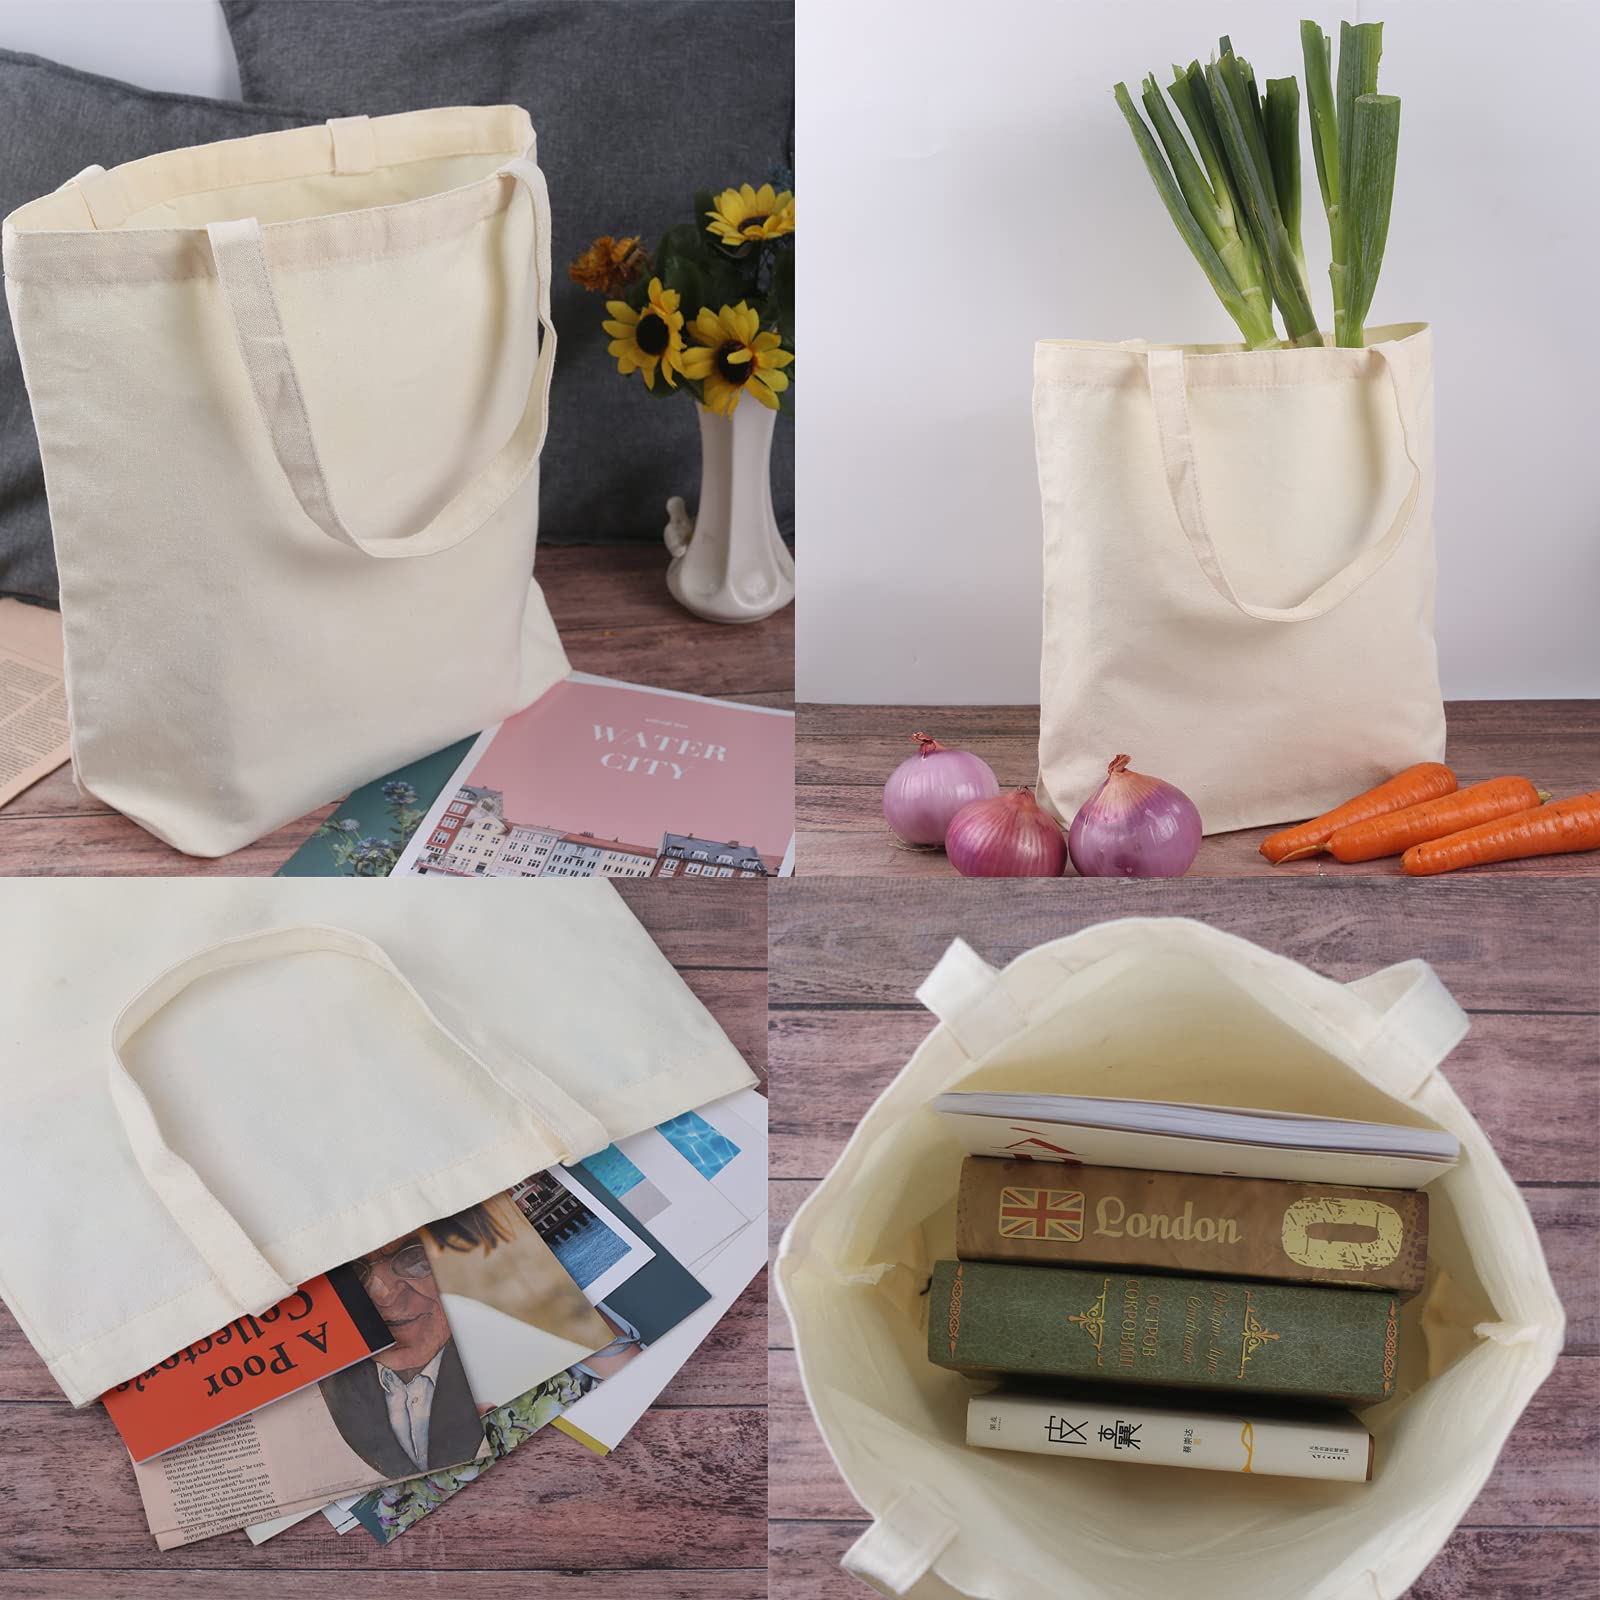 Veyist 4 Pcs Reusable Large Canvas Tote Bags, Blank Multi-purpose Canvas Bags, Suitable for DIY Project, Grocery Bags, Shopping Bags, Book Bags, Gift Bags. Cotton bags. (Size: 15.7''x15.7''x4.7'')